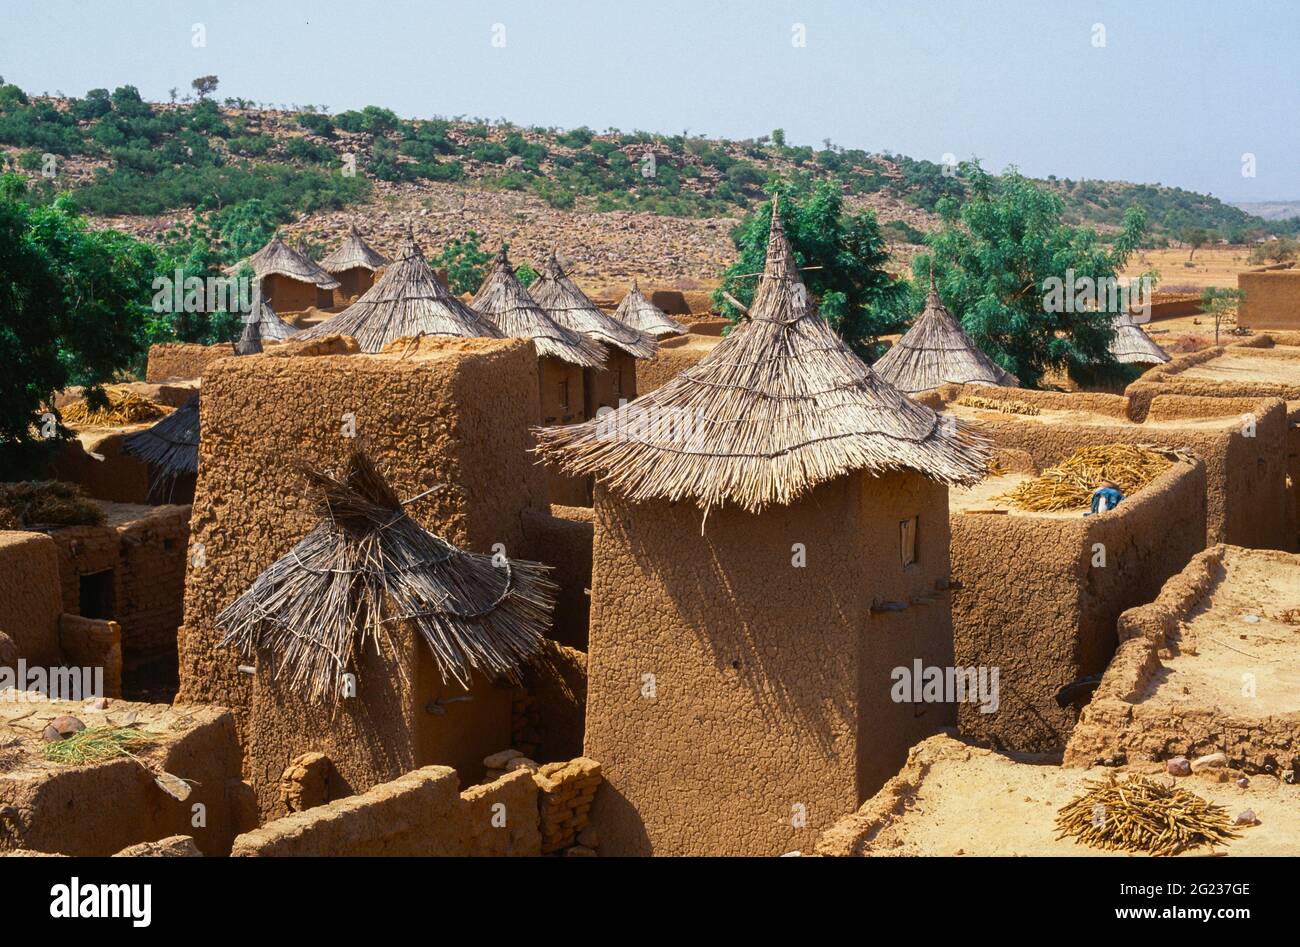 Traditional thatched Dogon grainstores and houses, with millet drying on the flat rooves. Kani-Kombole Village, Mopti Region, Mali, West Africa Stock Photo